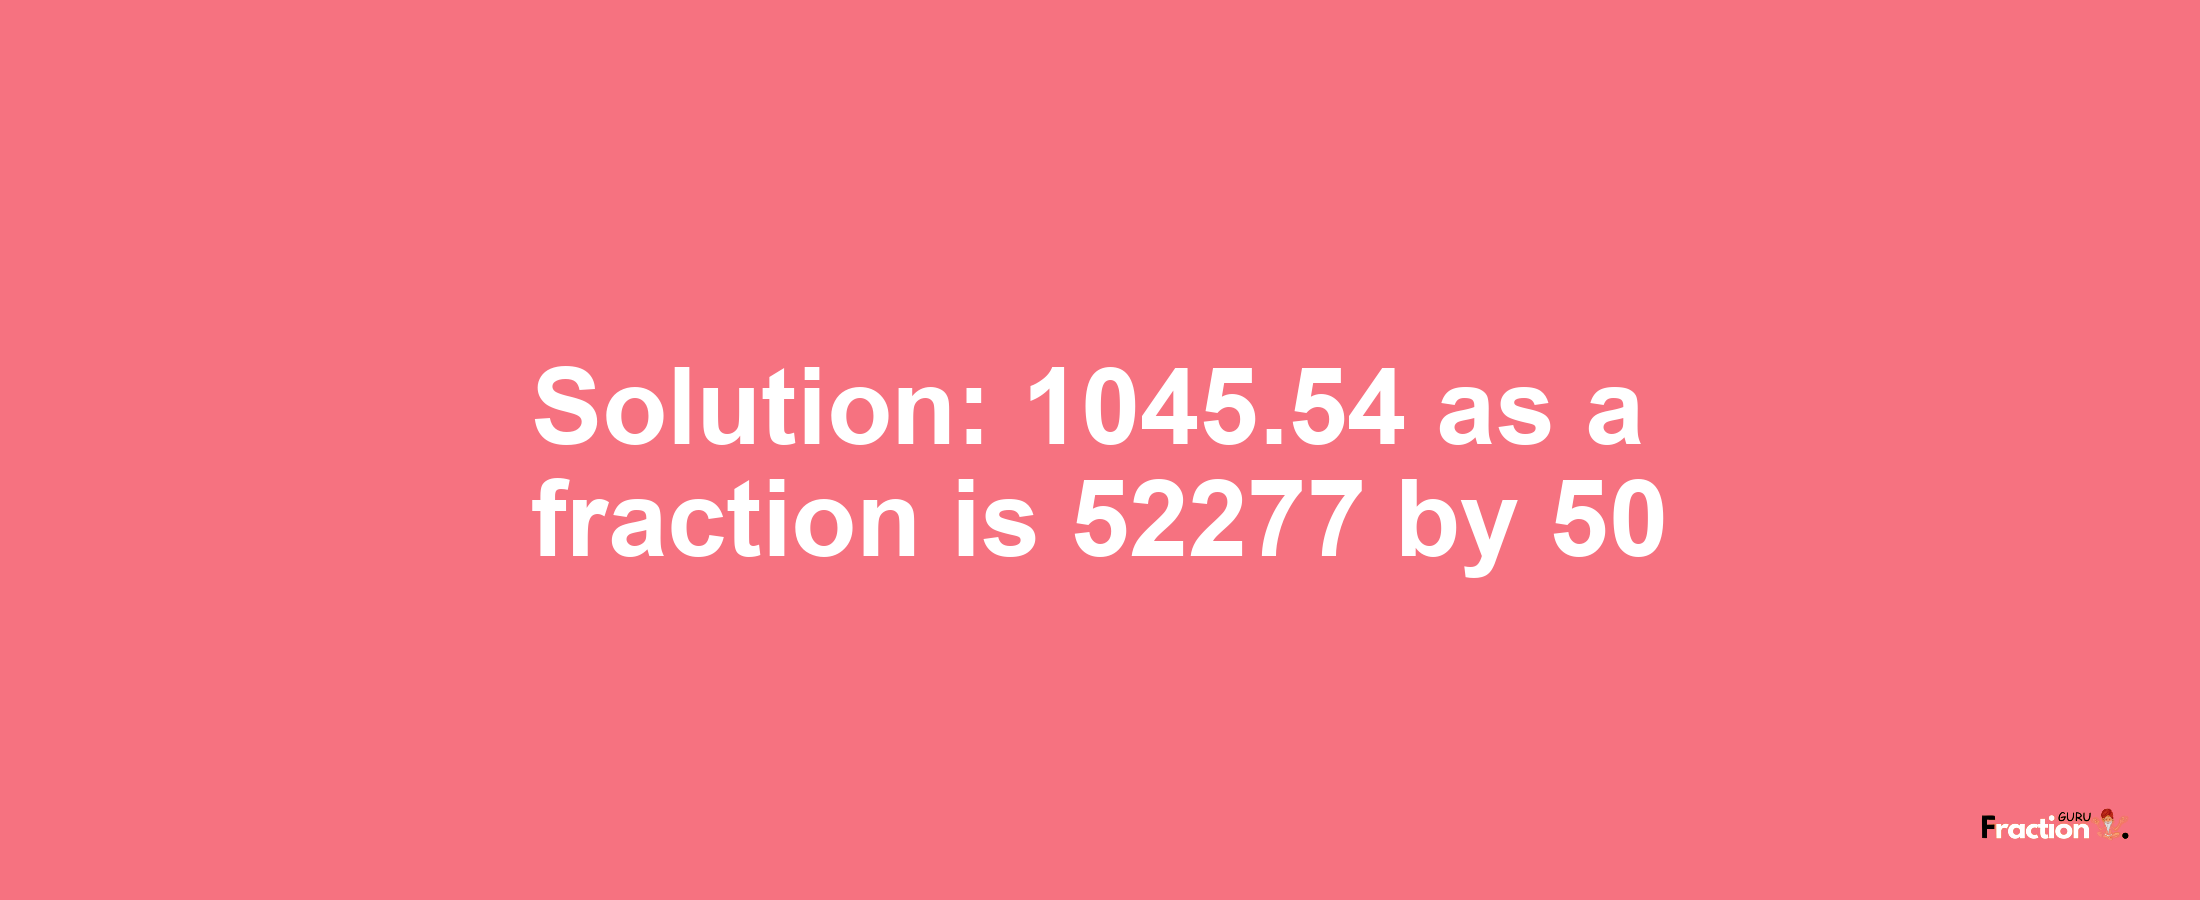 Solution:1045.54 as a fraction is 52277/50